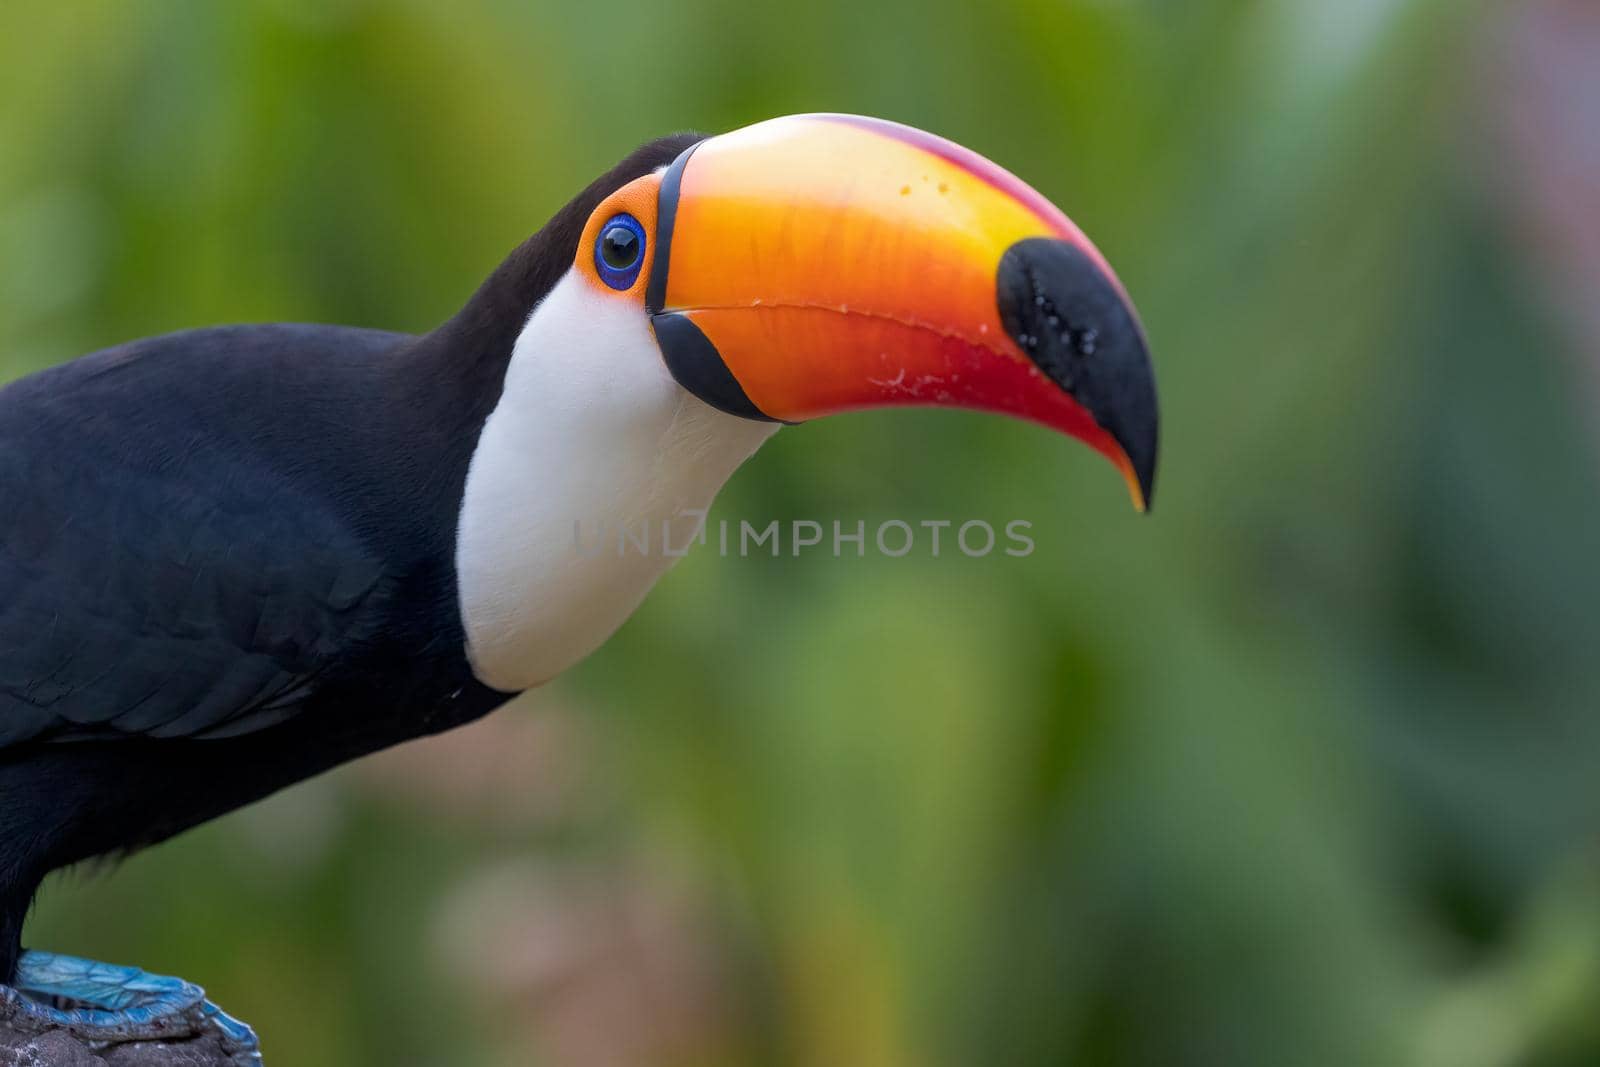 The Toco toucan, Ramphastos toco, is the largest of over 40 different species of toucan.